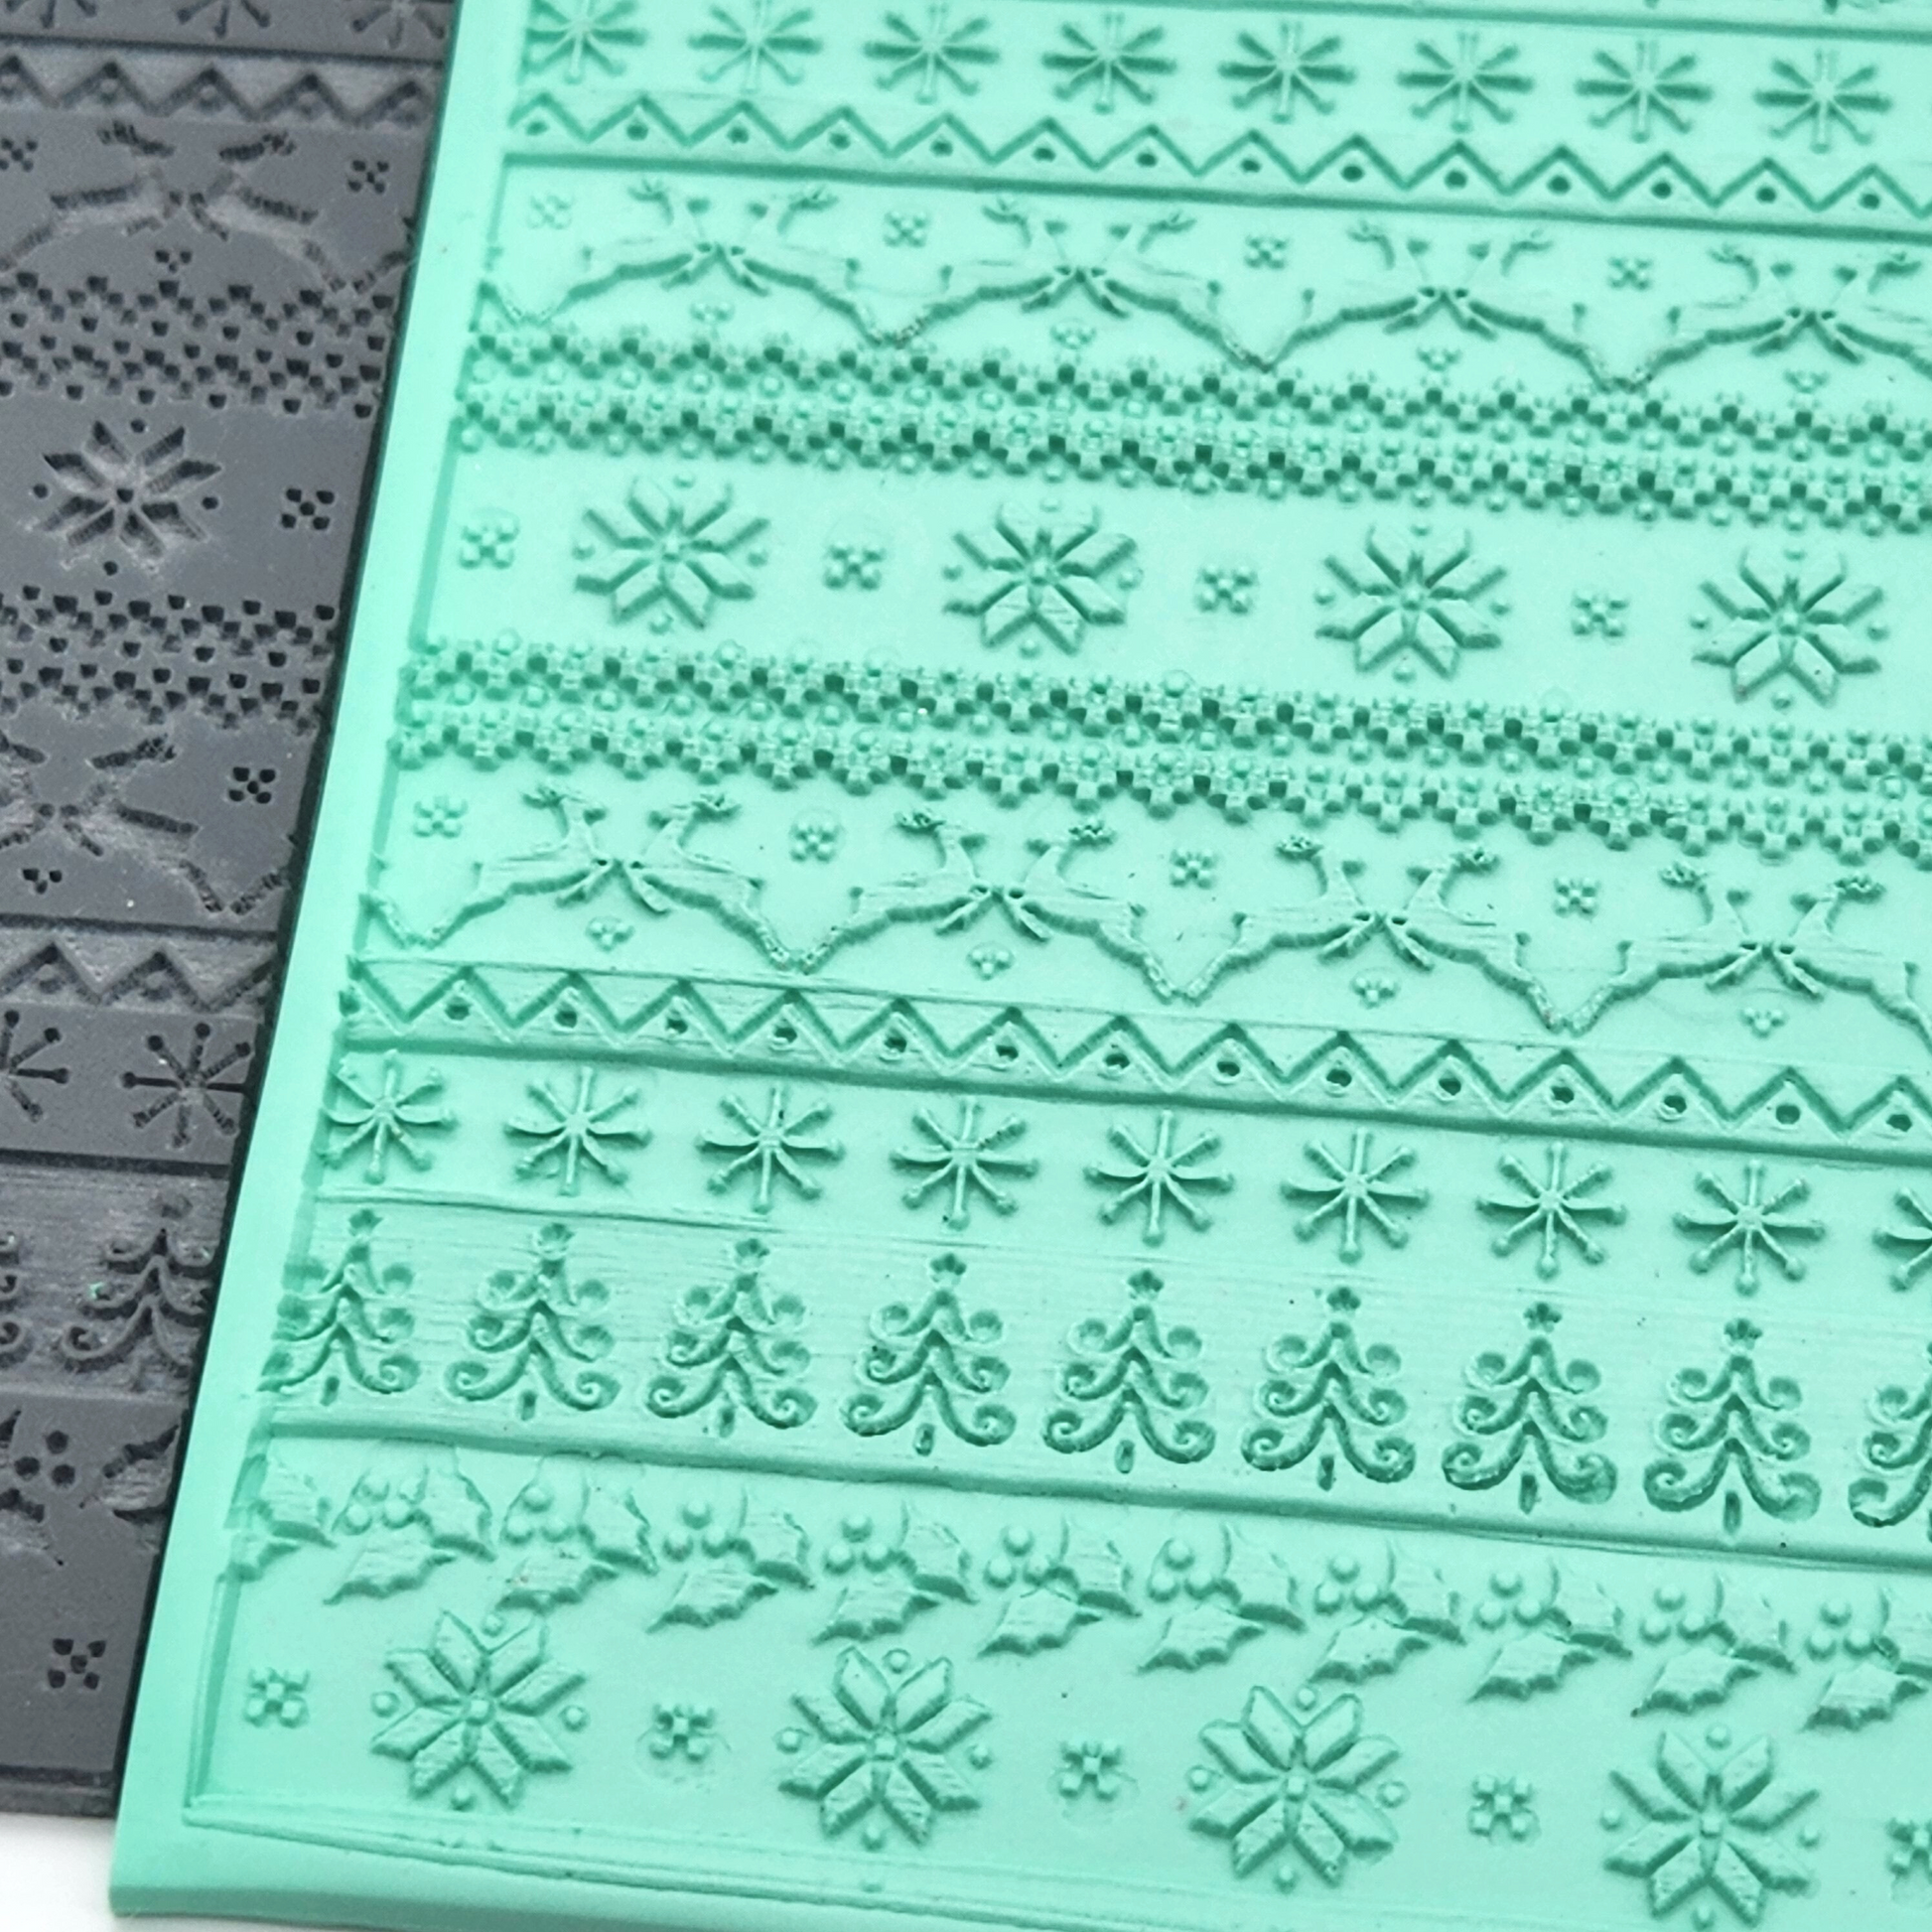 Christmas Knits Texture Rubber Mat Details for Polymer Clay Winter Crafts